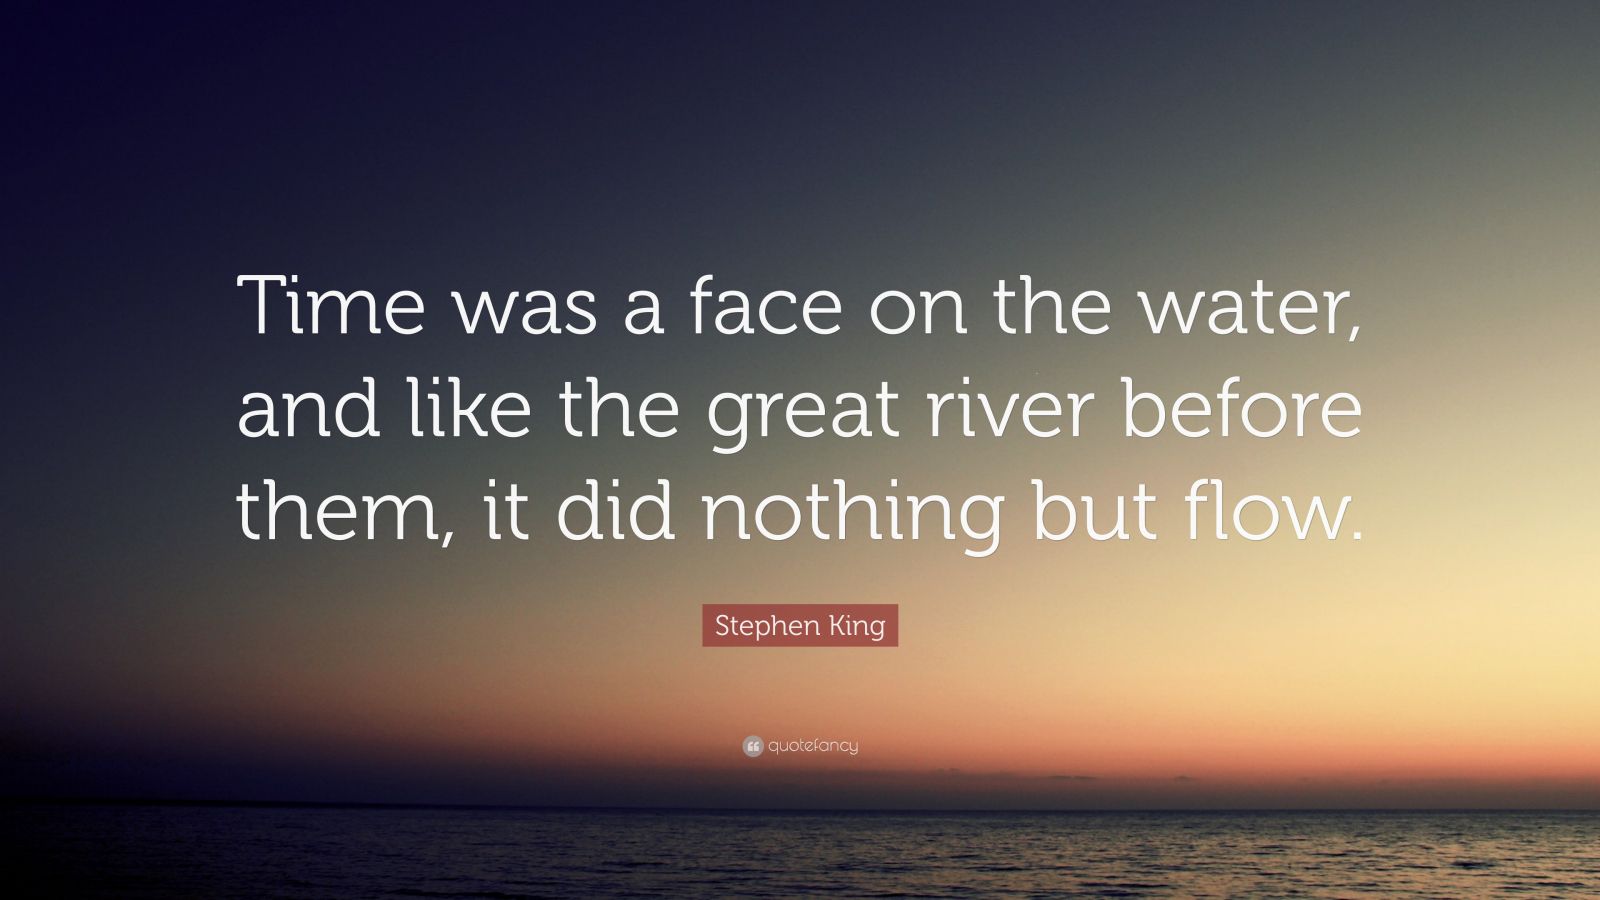 Stephen King Quote: “Time was a face on the water, and like the great ... Nothing Happens Before Its Time Quotes